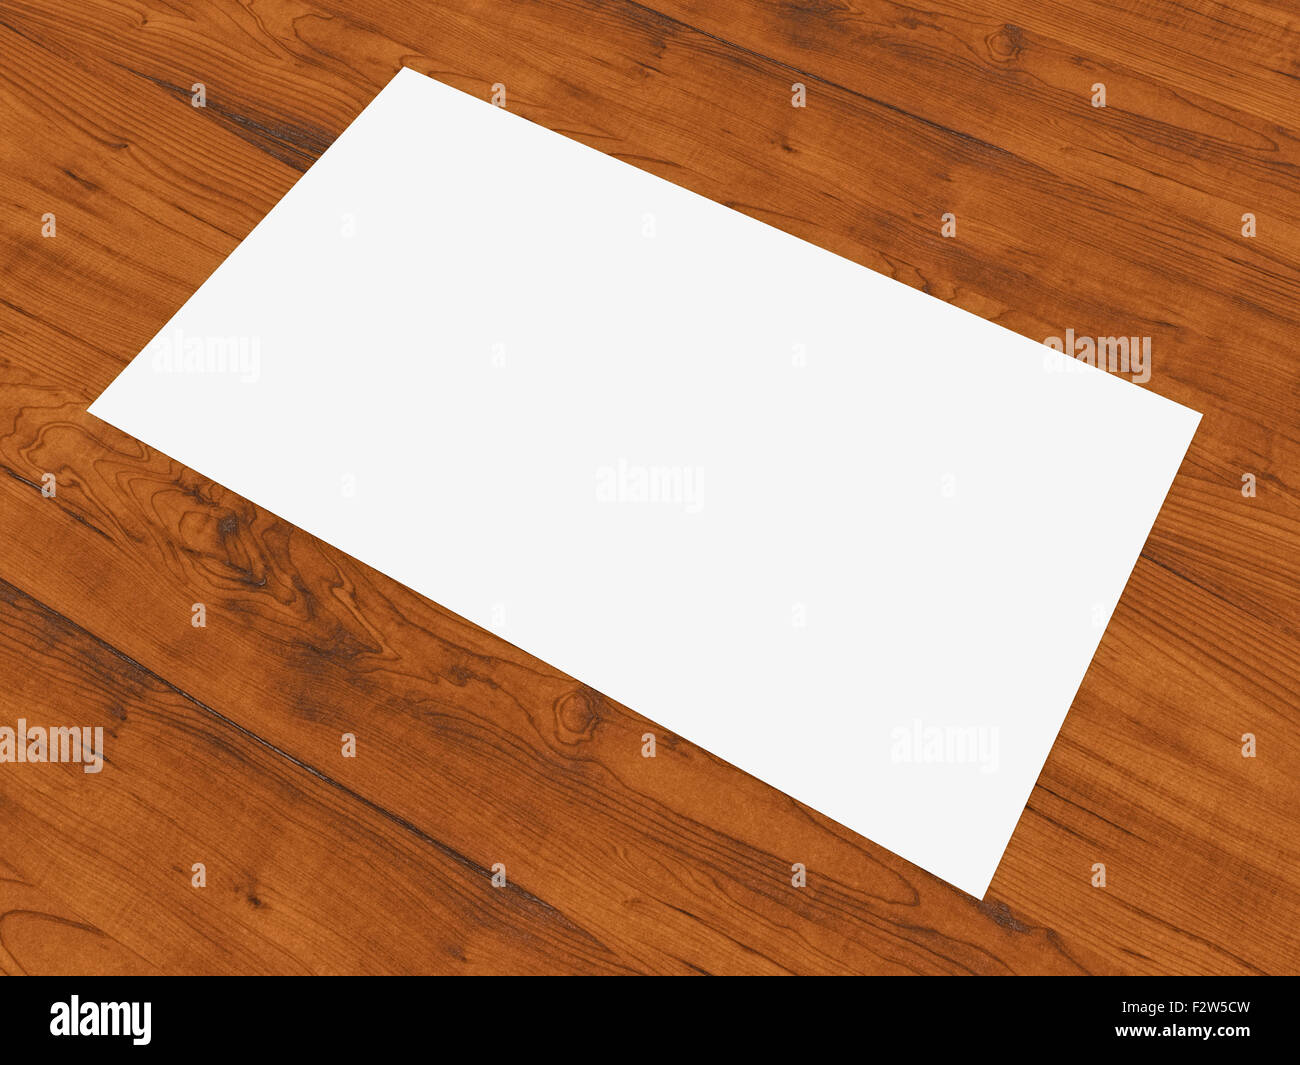 Blank business card resting on wood surface. Stock Photo